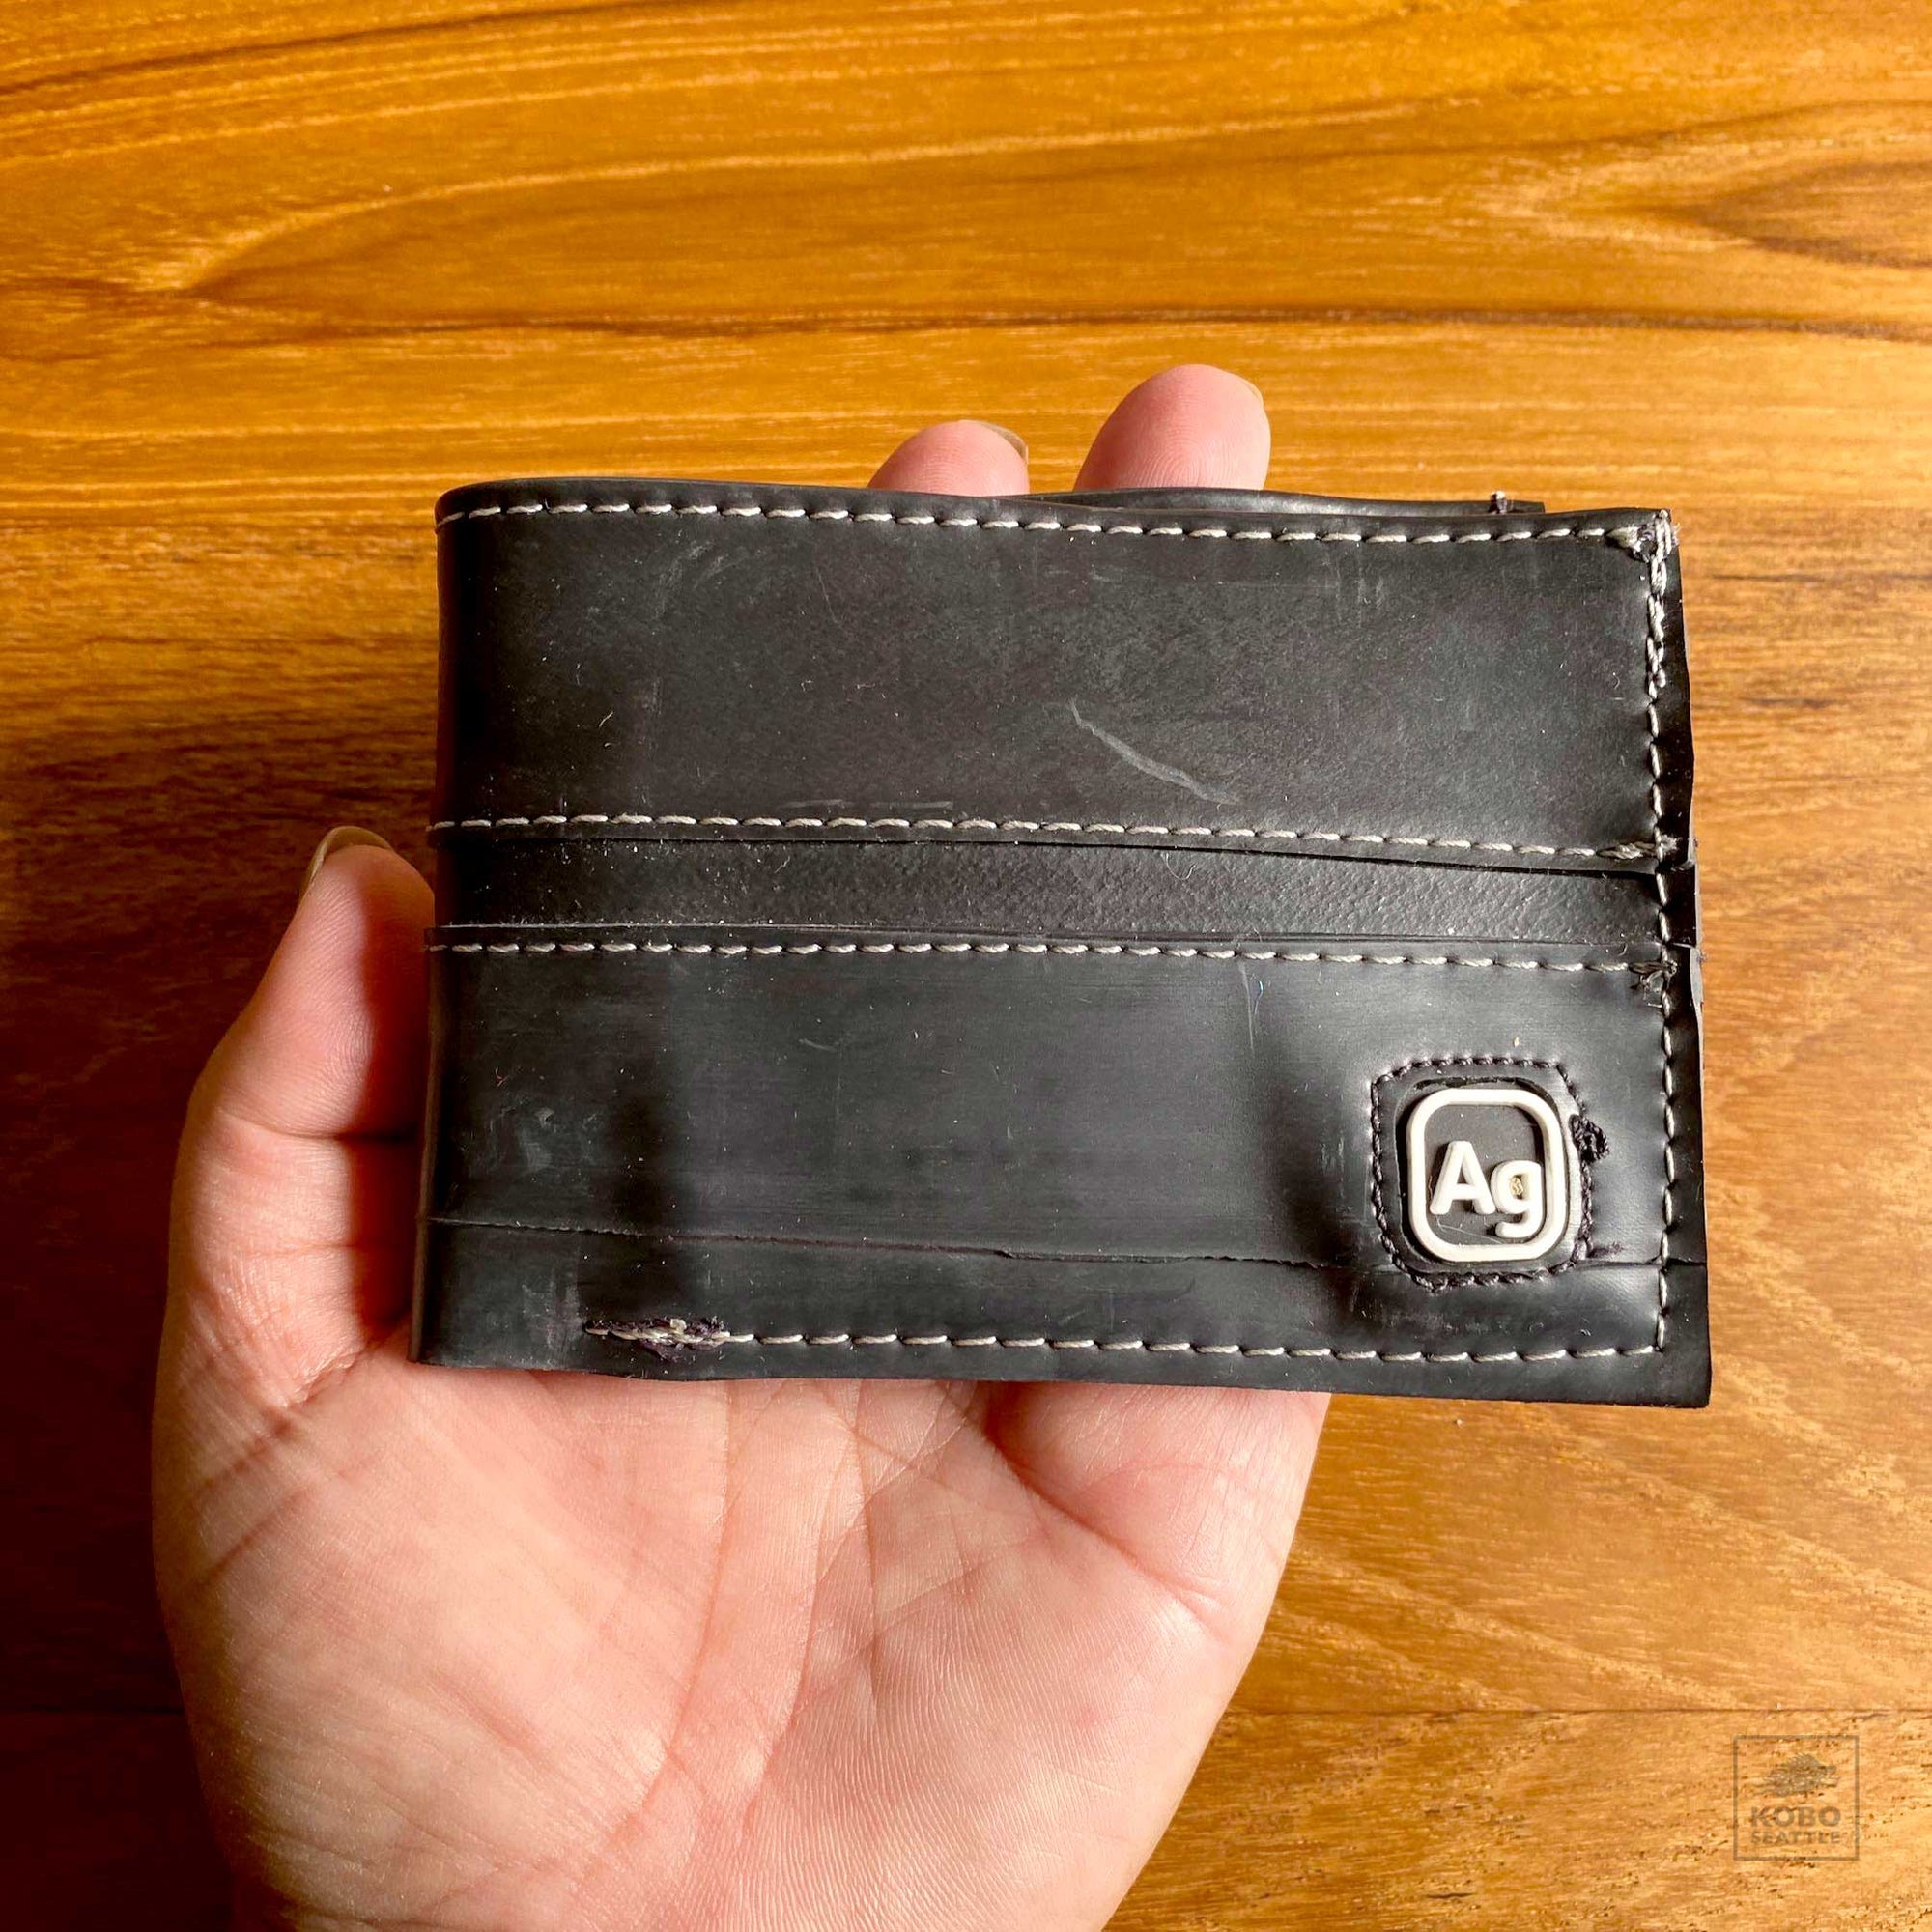 Franklin Wallet from Alchemy Goods